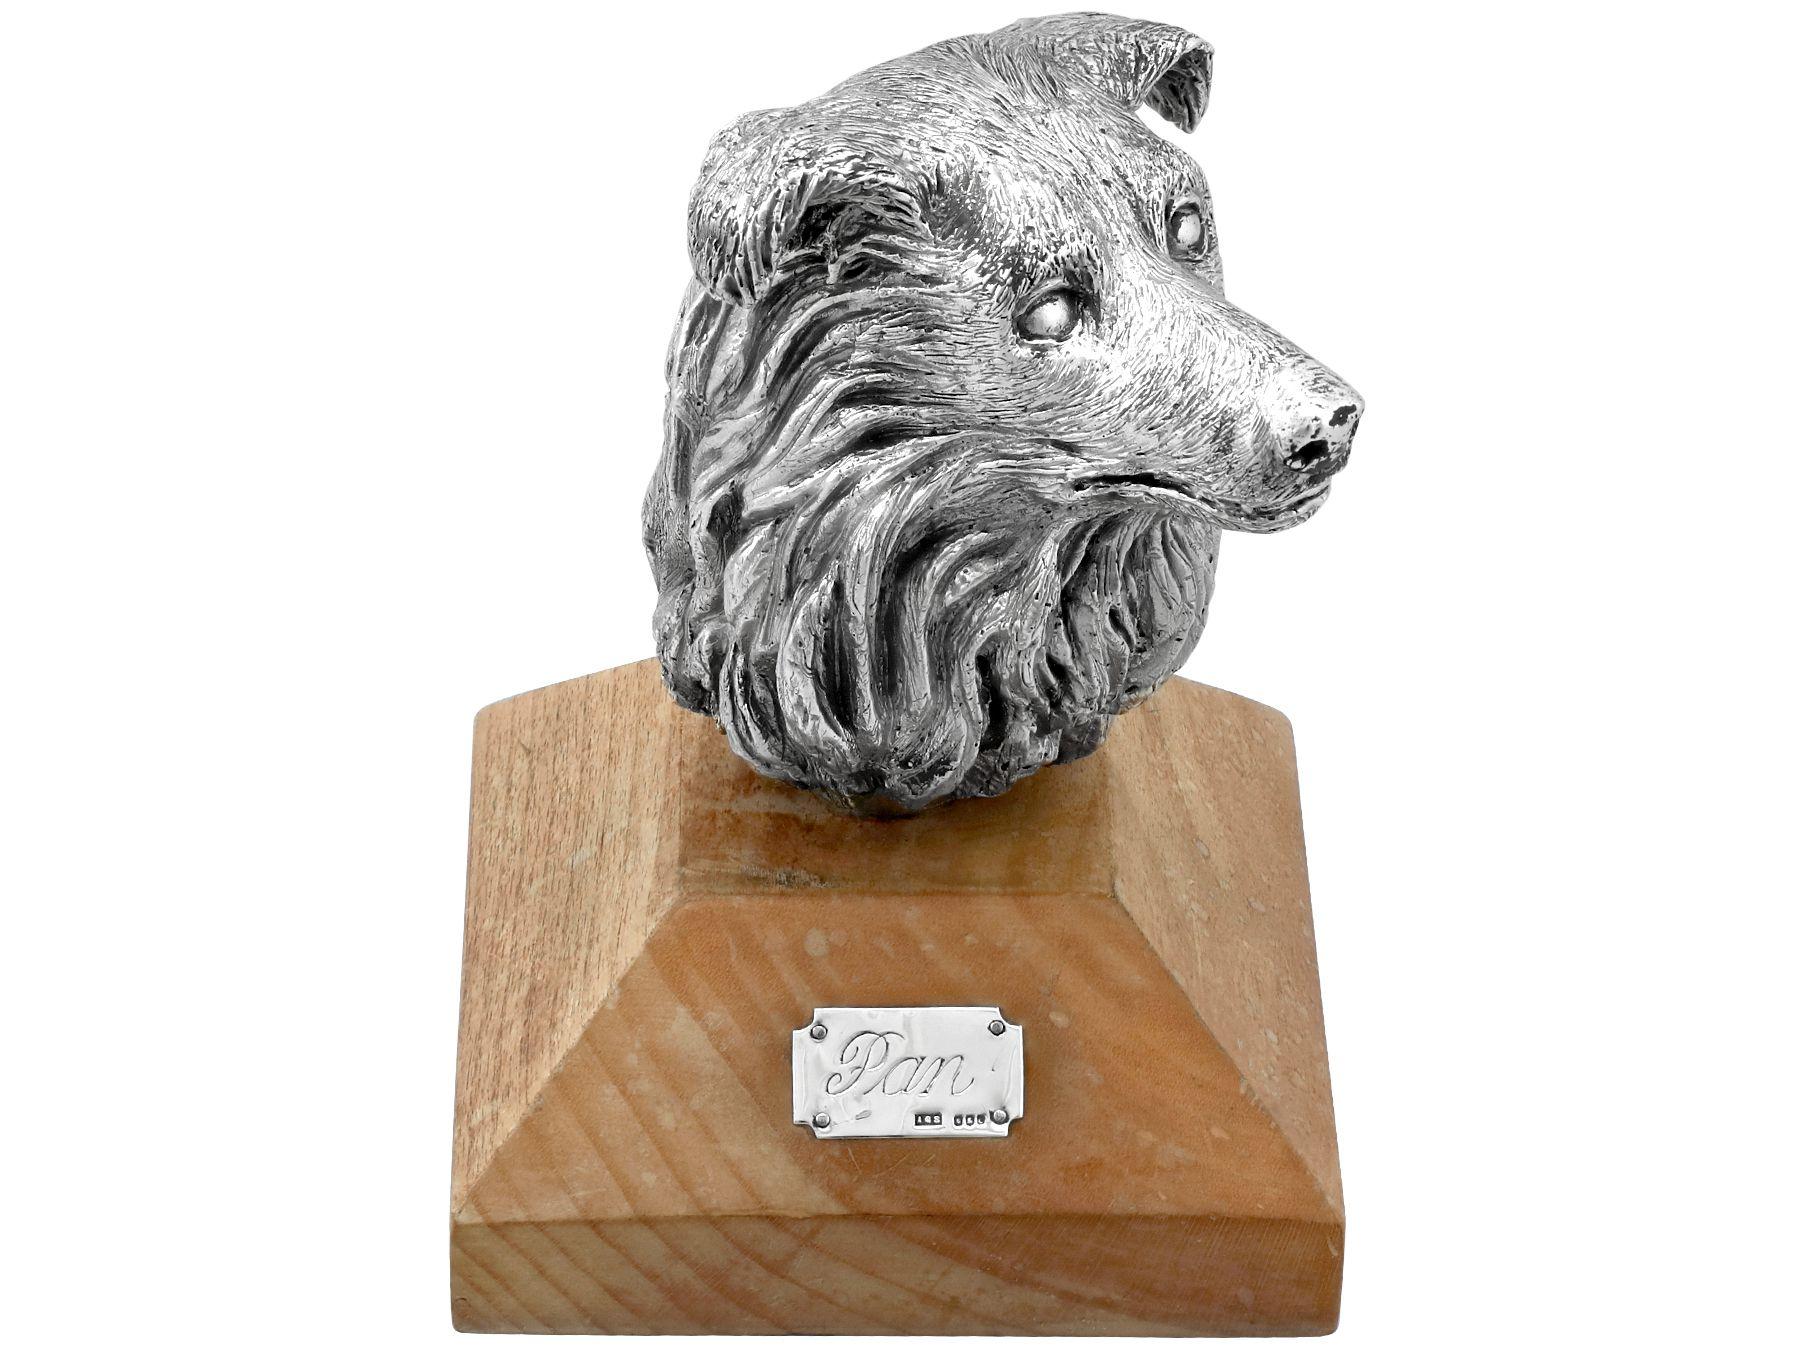 Vintage Scottish Sterling Silver Dog Paperweight In Excellent Condition For Sale In Jesmond, Newcastle Upon Tyne